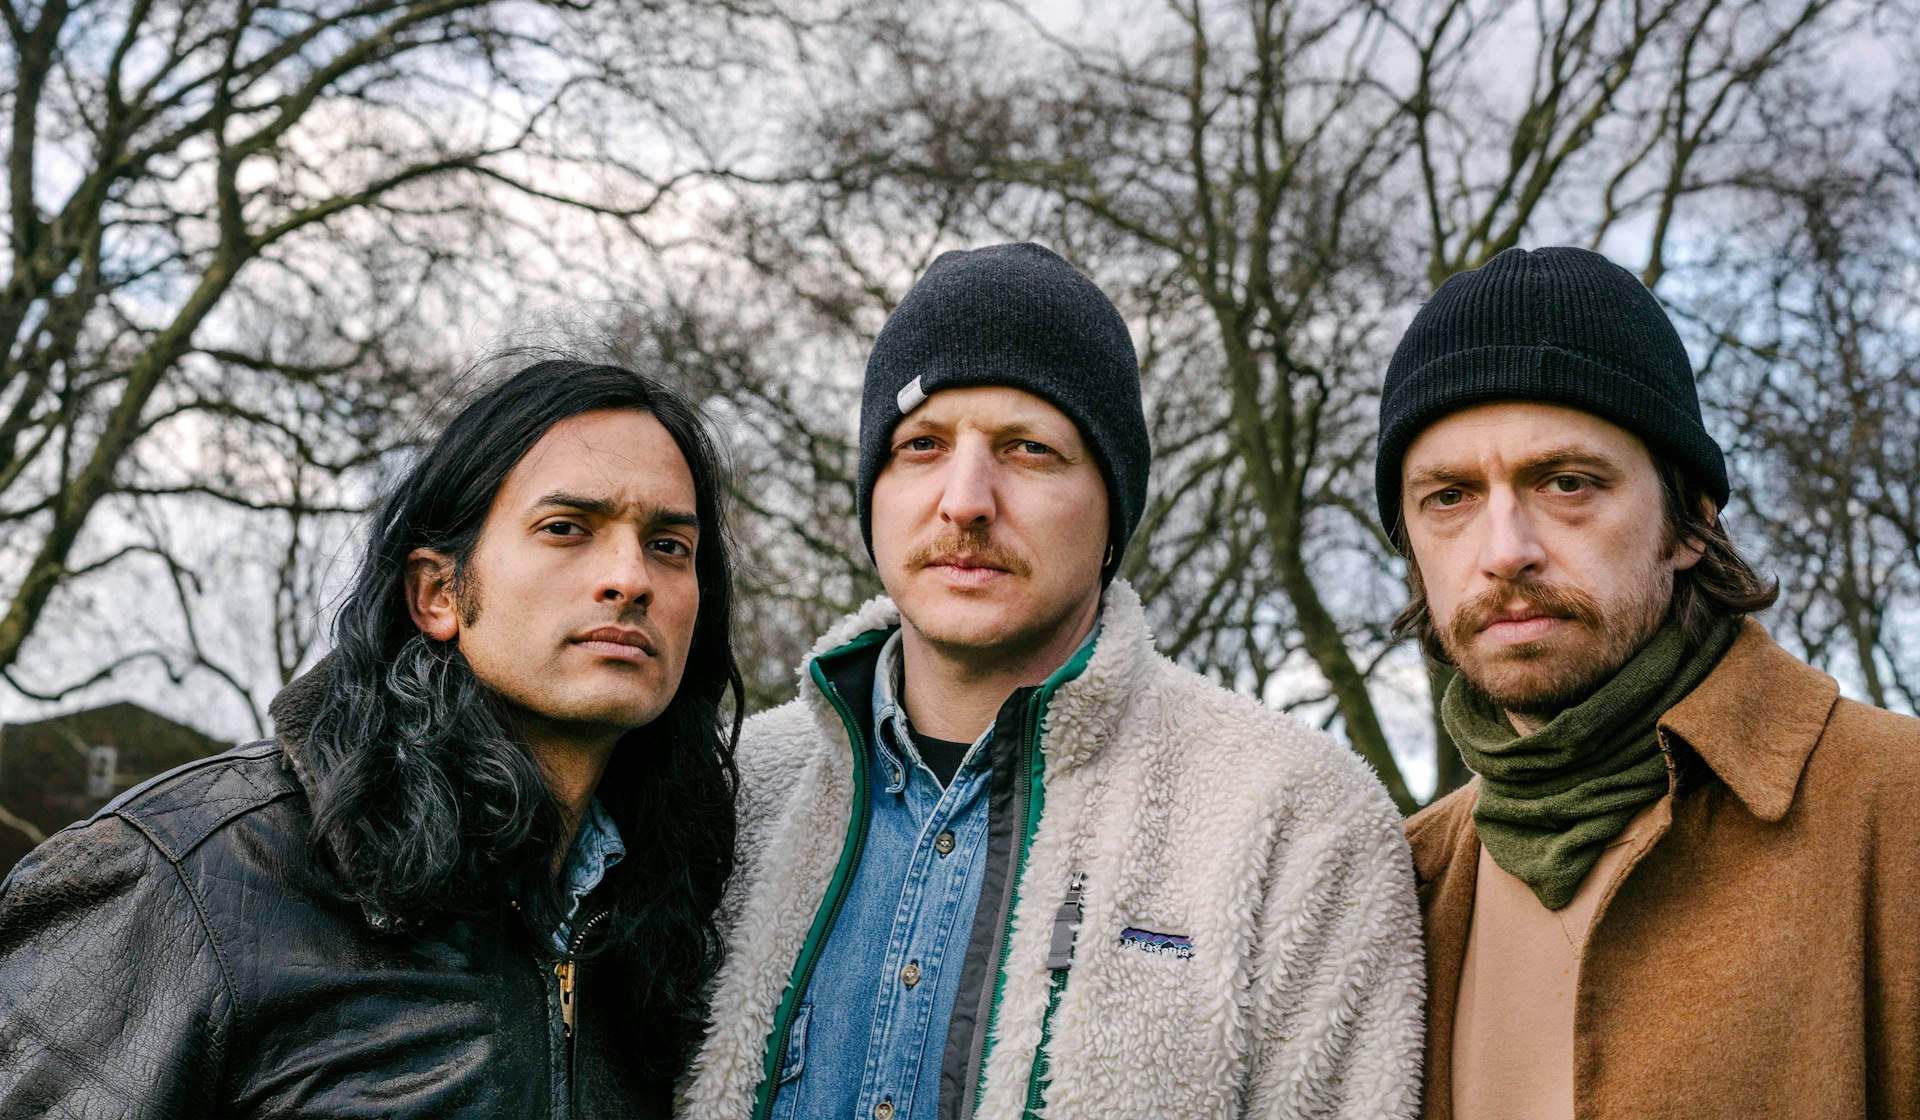 Unrelenting ambition: An interview with Yeasayer